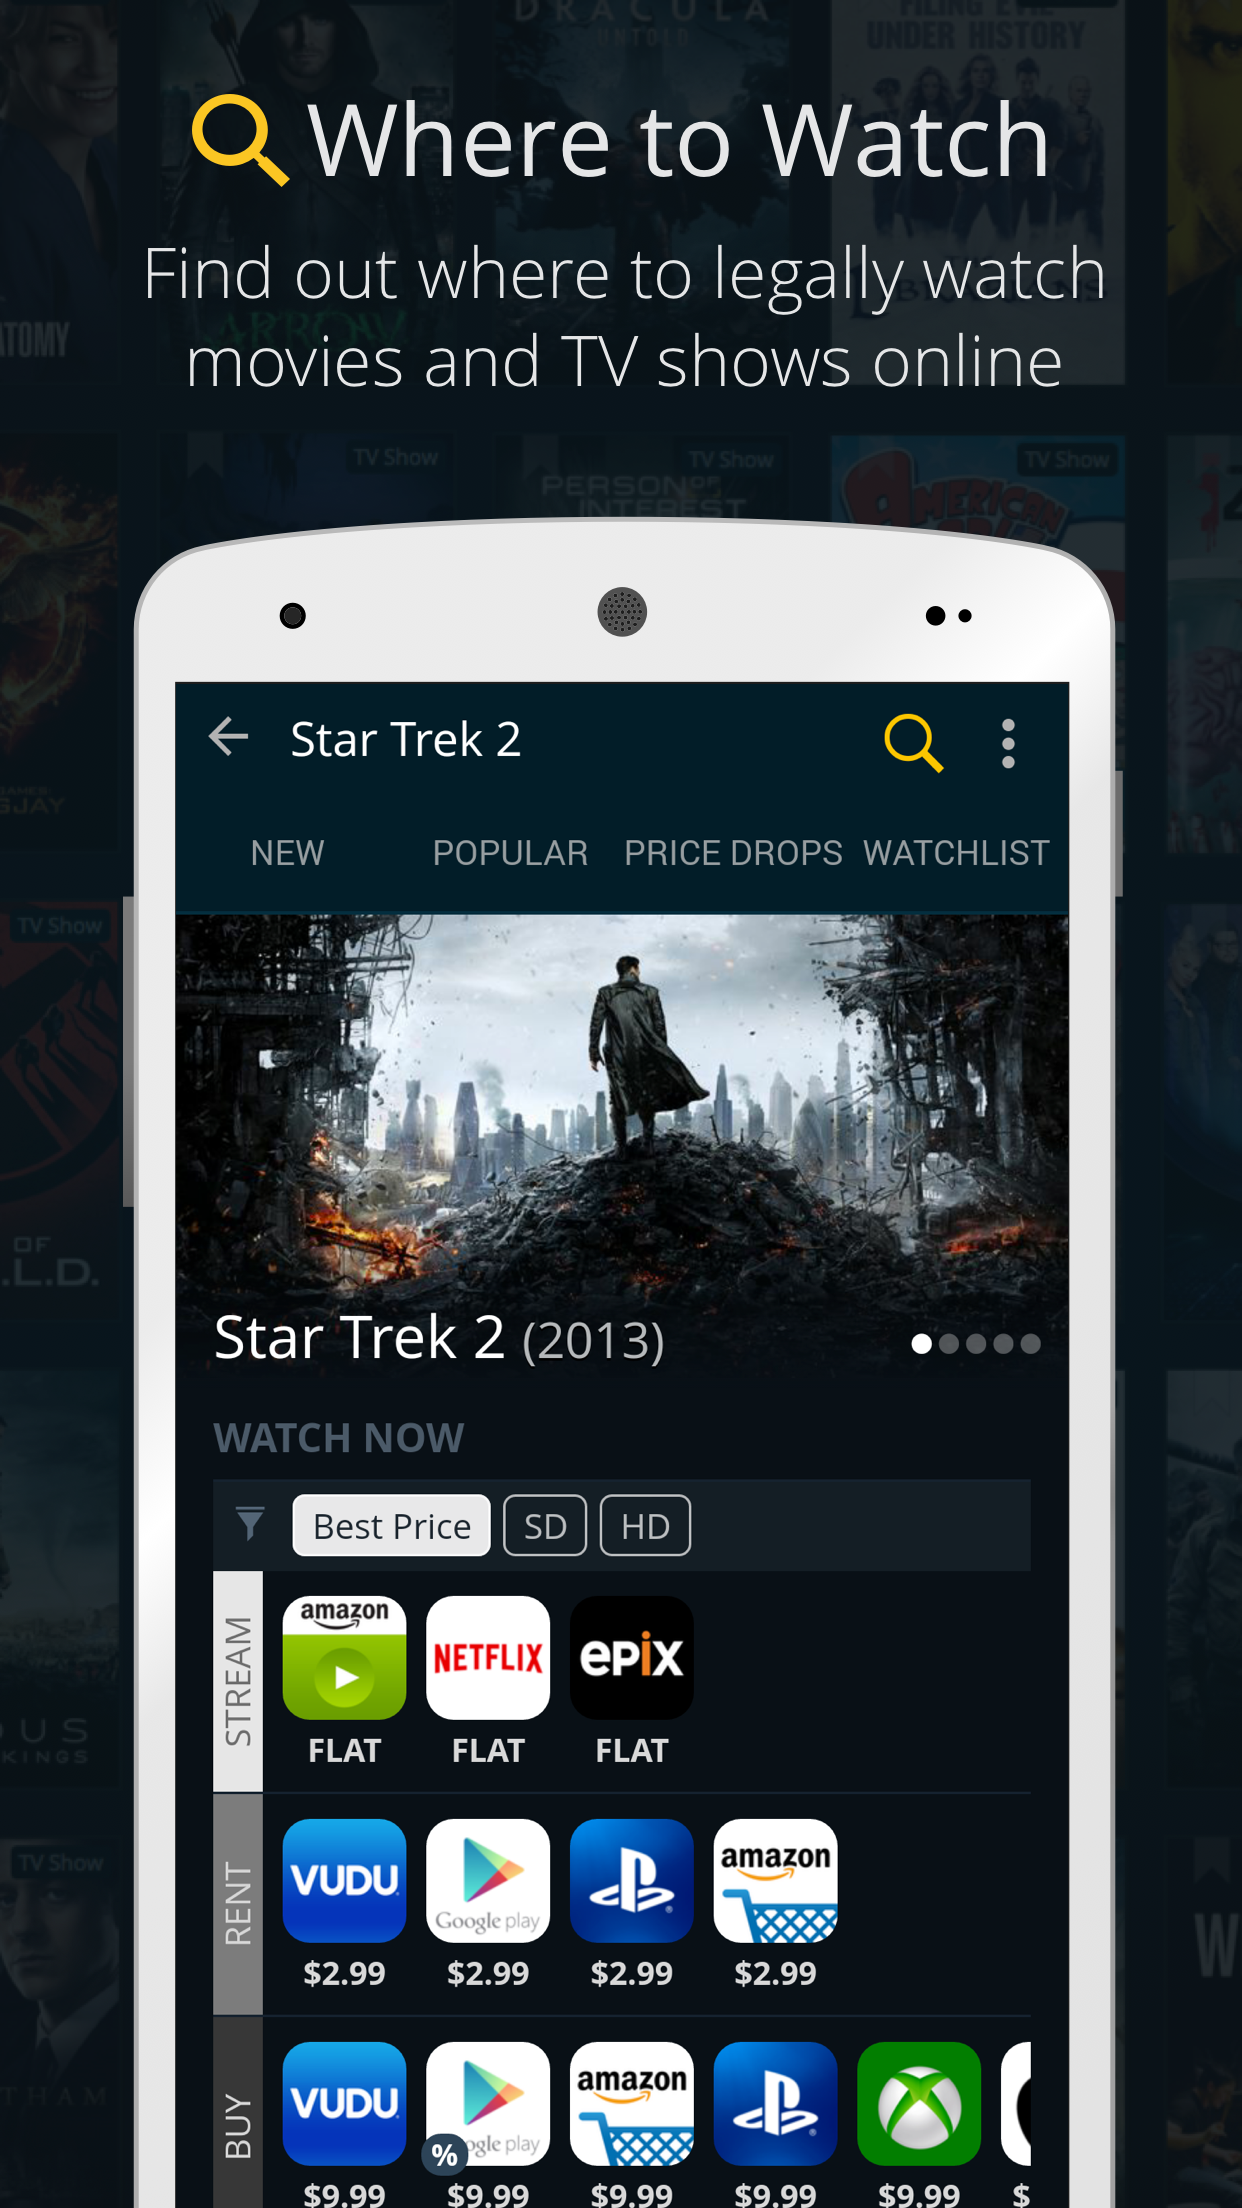 Android application JustWatch - Streaming Guide screenshort